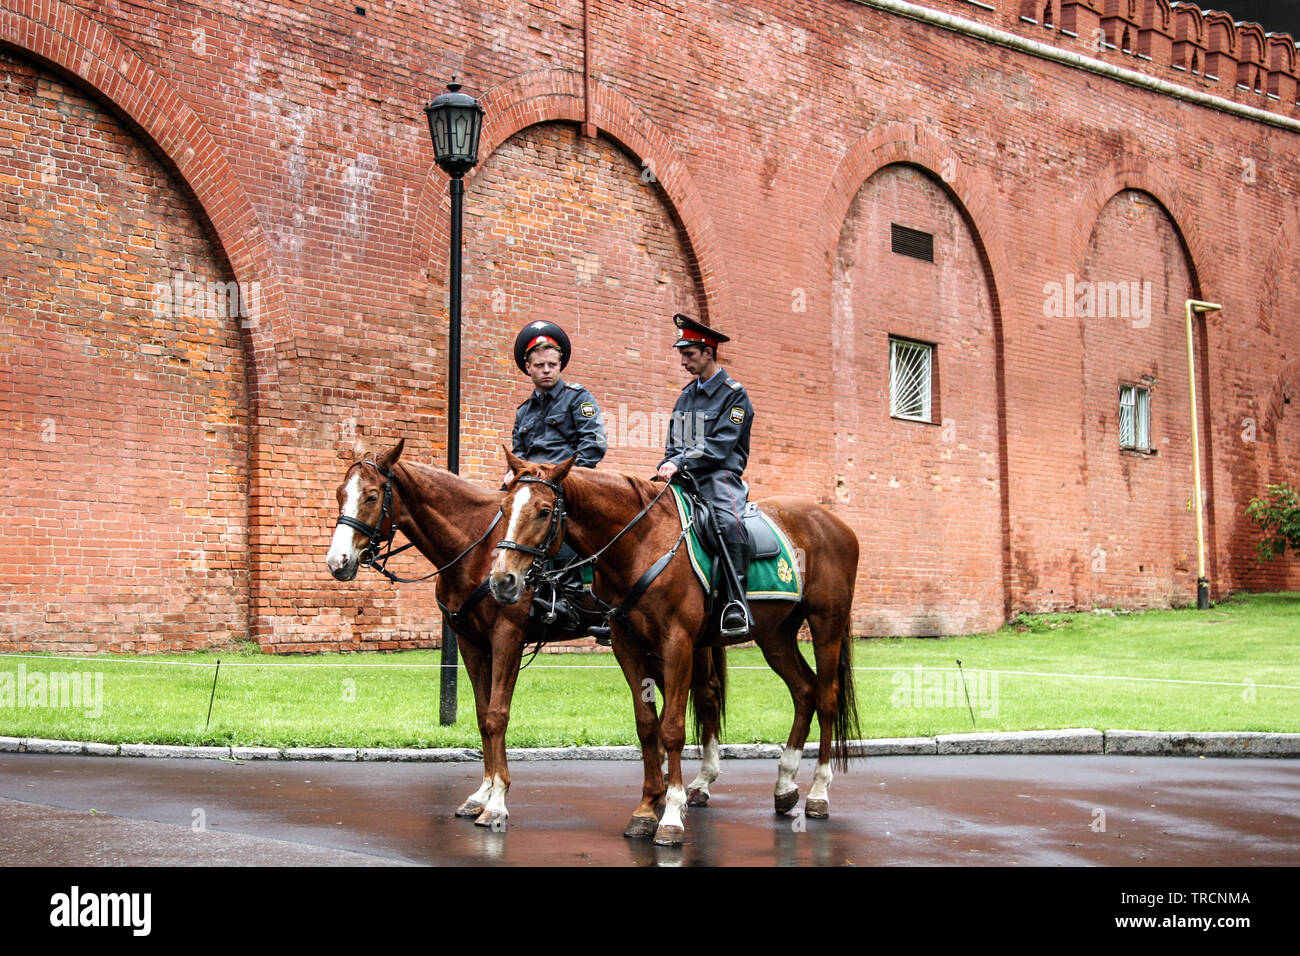 Two Moscow police officers on horseback at the Kremlin Wall, Moscow Russian Federation Stock Photo